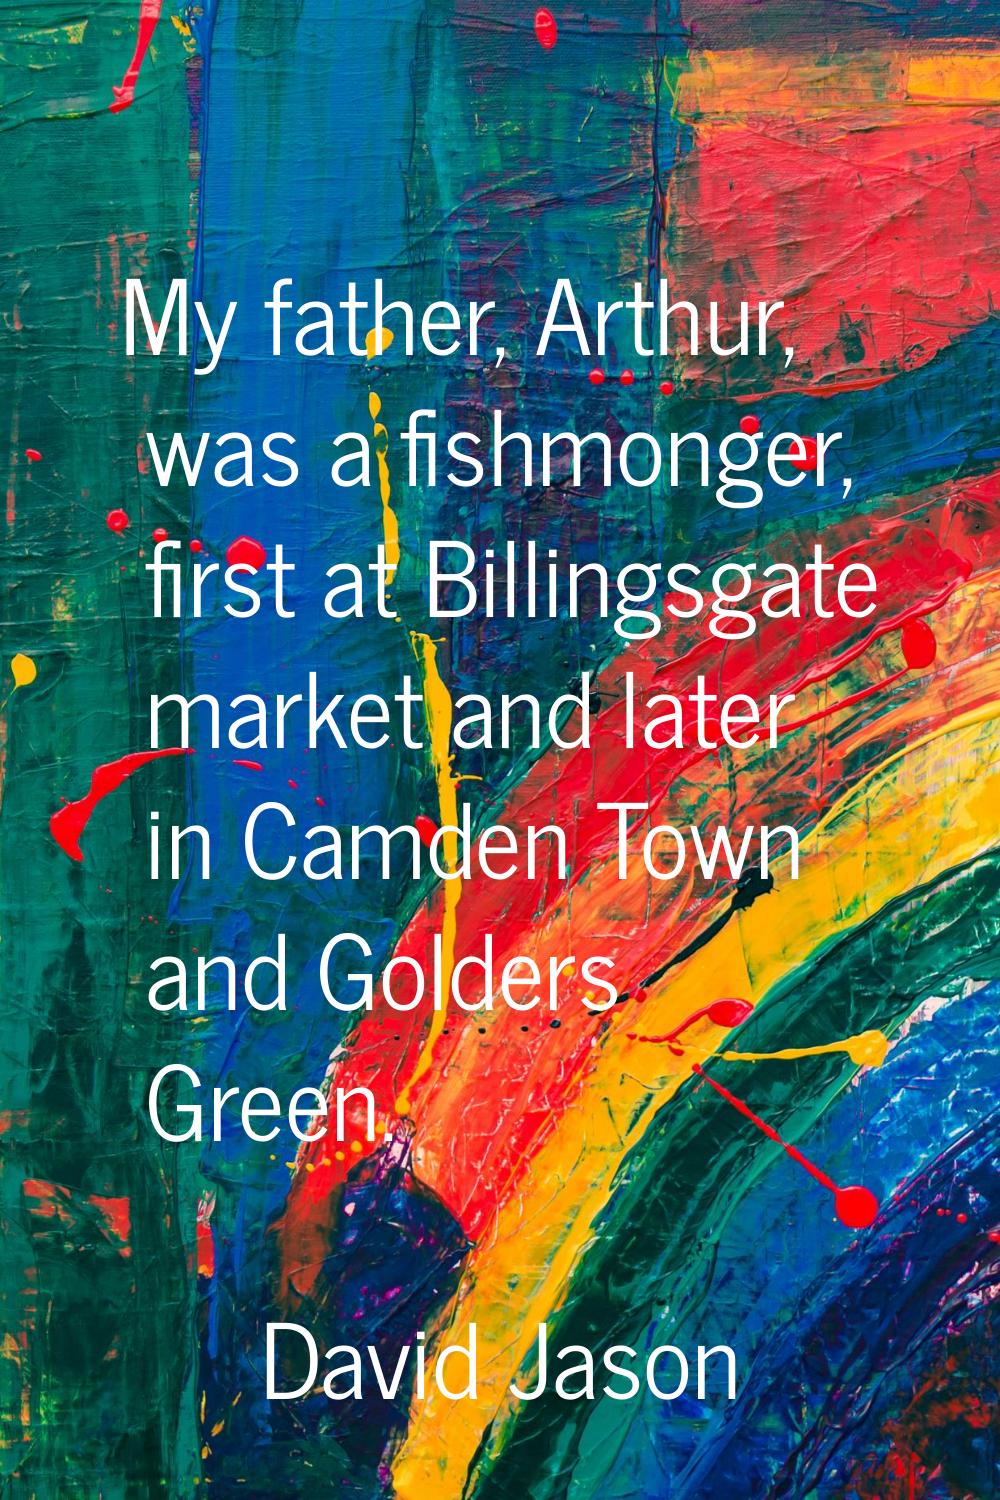 My father, Arthur, was a fishmonger, first at Billingsgate market and later in Camden Town and Gold